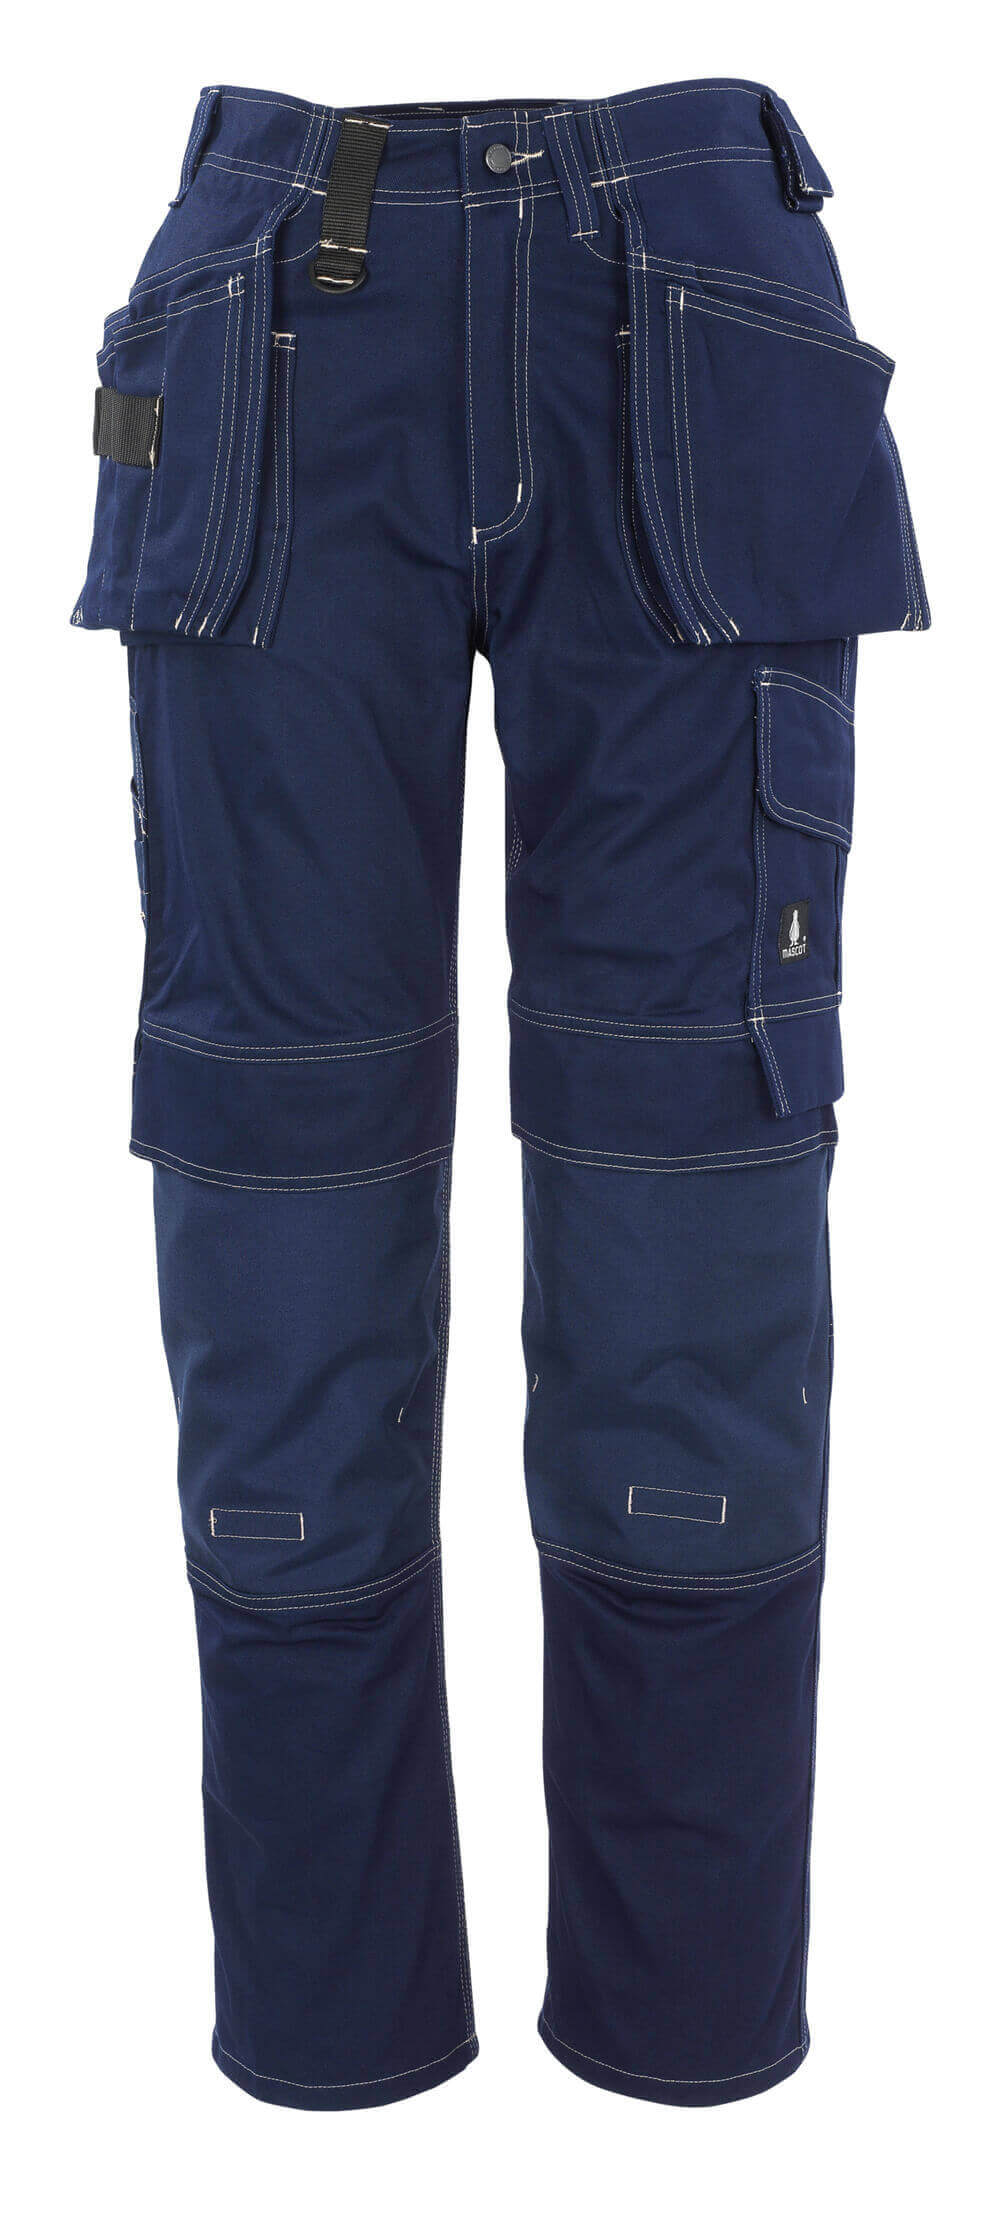 Winter work trousers constructioncompanies, logistics trousers